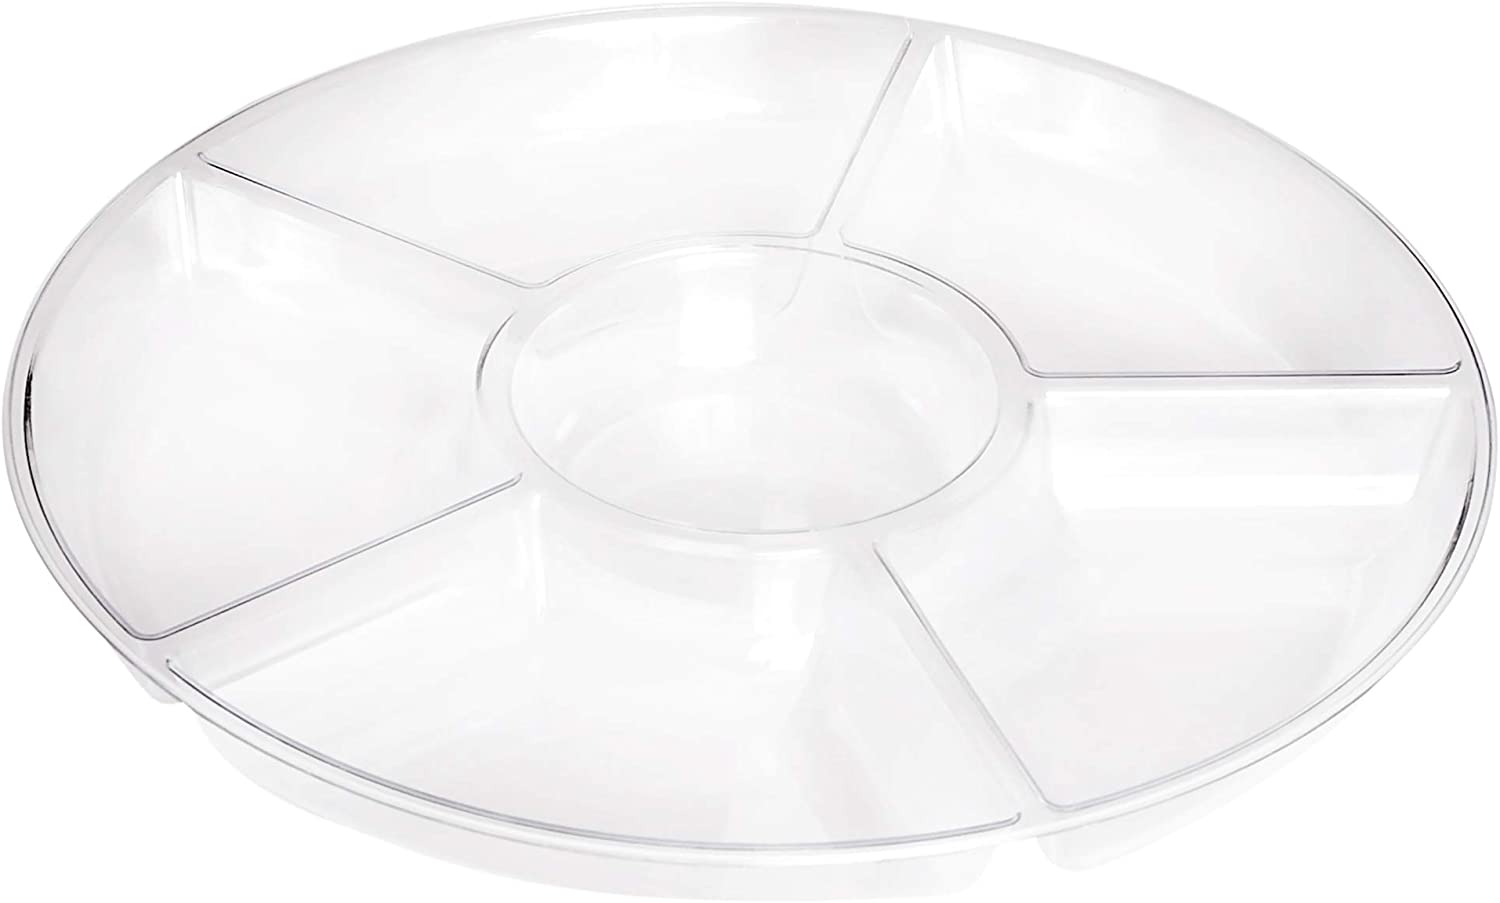 HTAIGUO Sectional Round Plastic Serving Tray/Platters Clear Pack of 